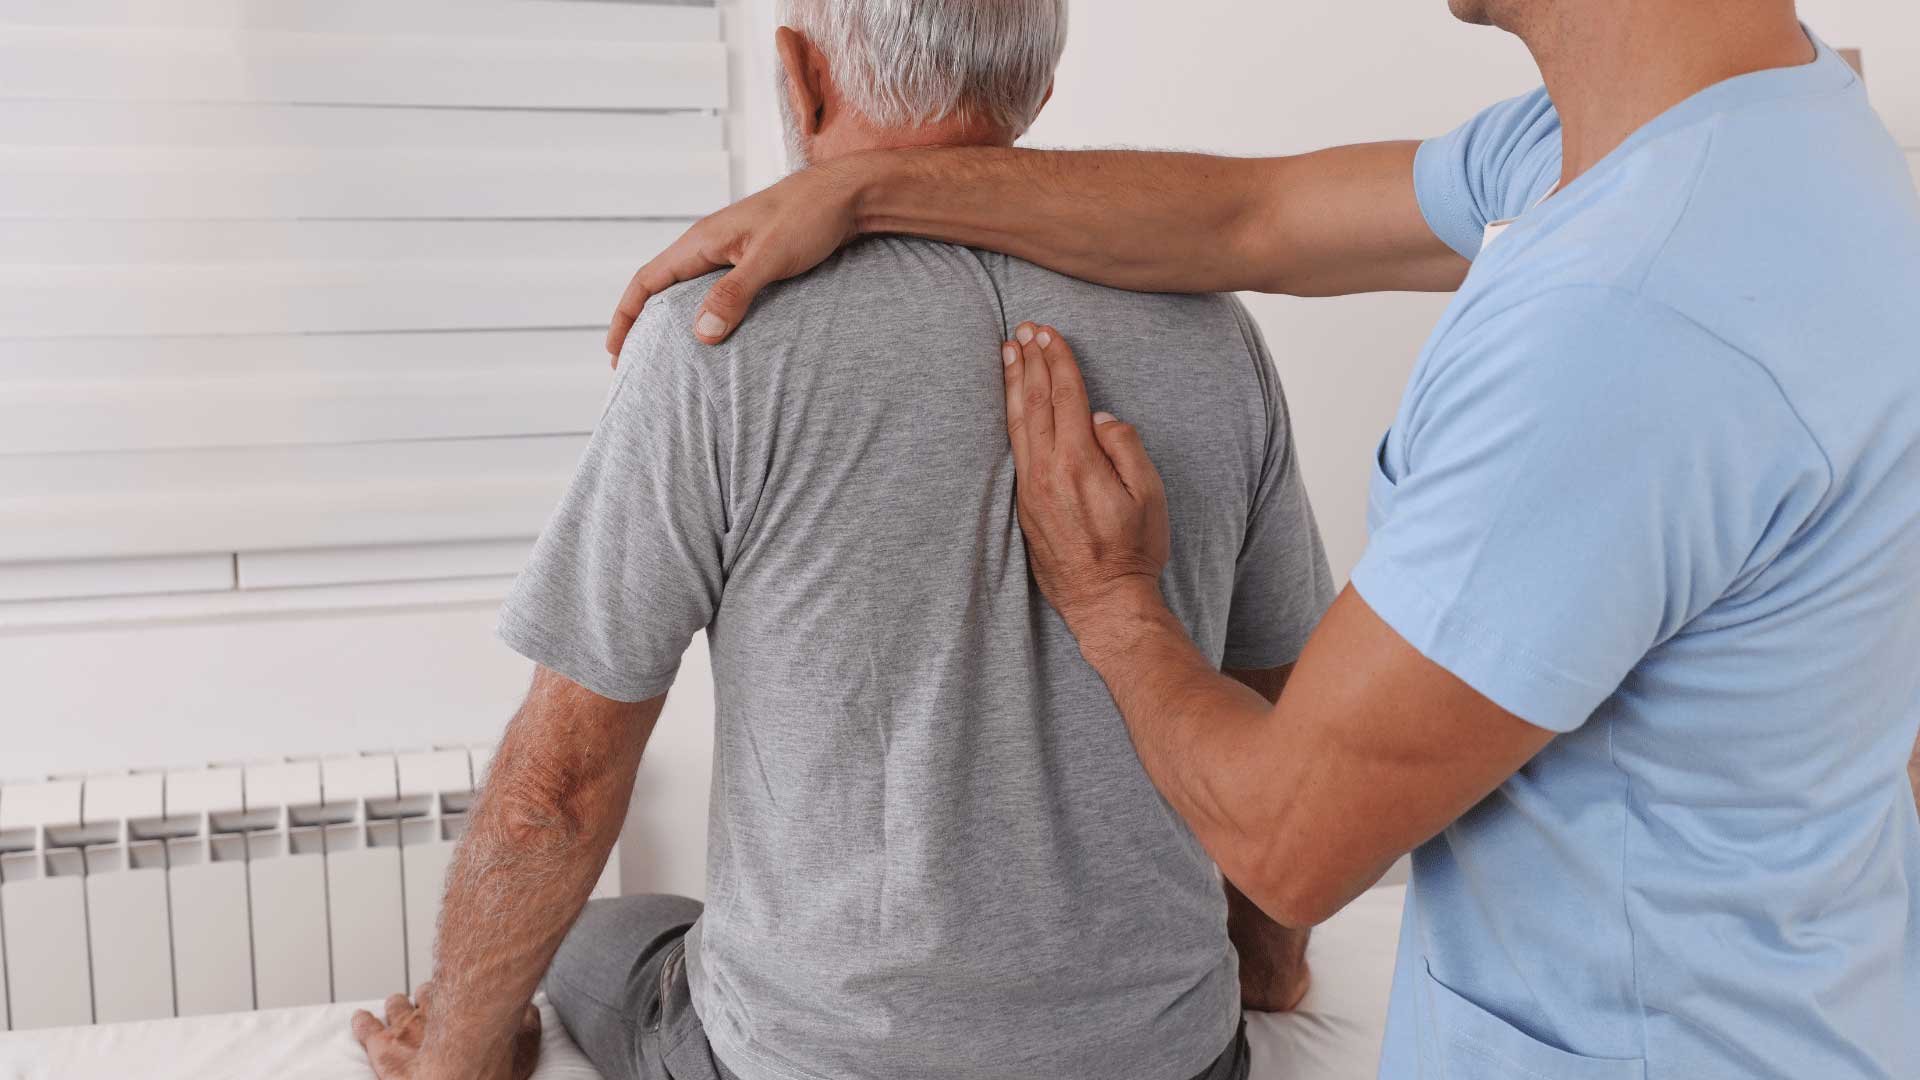 Chiropractic care for back pain